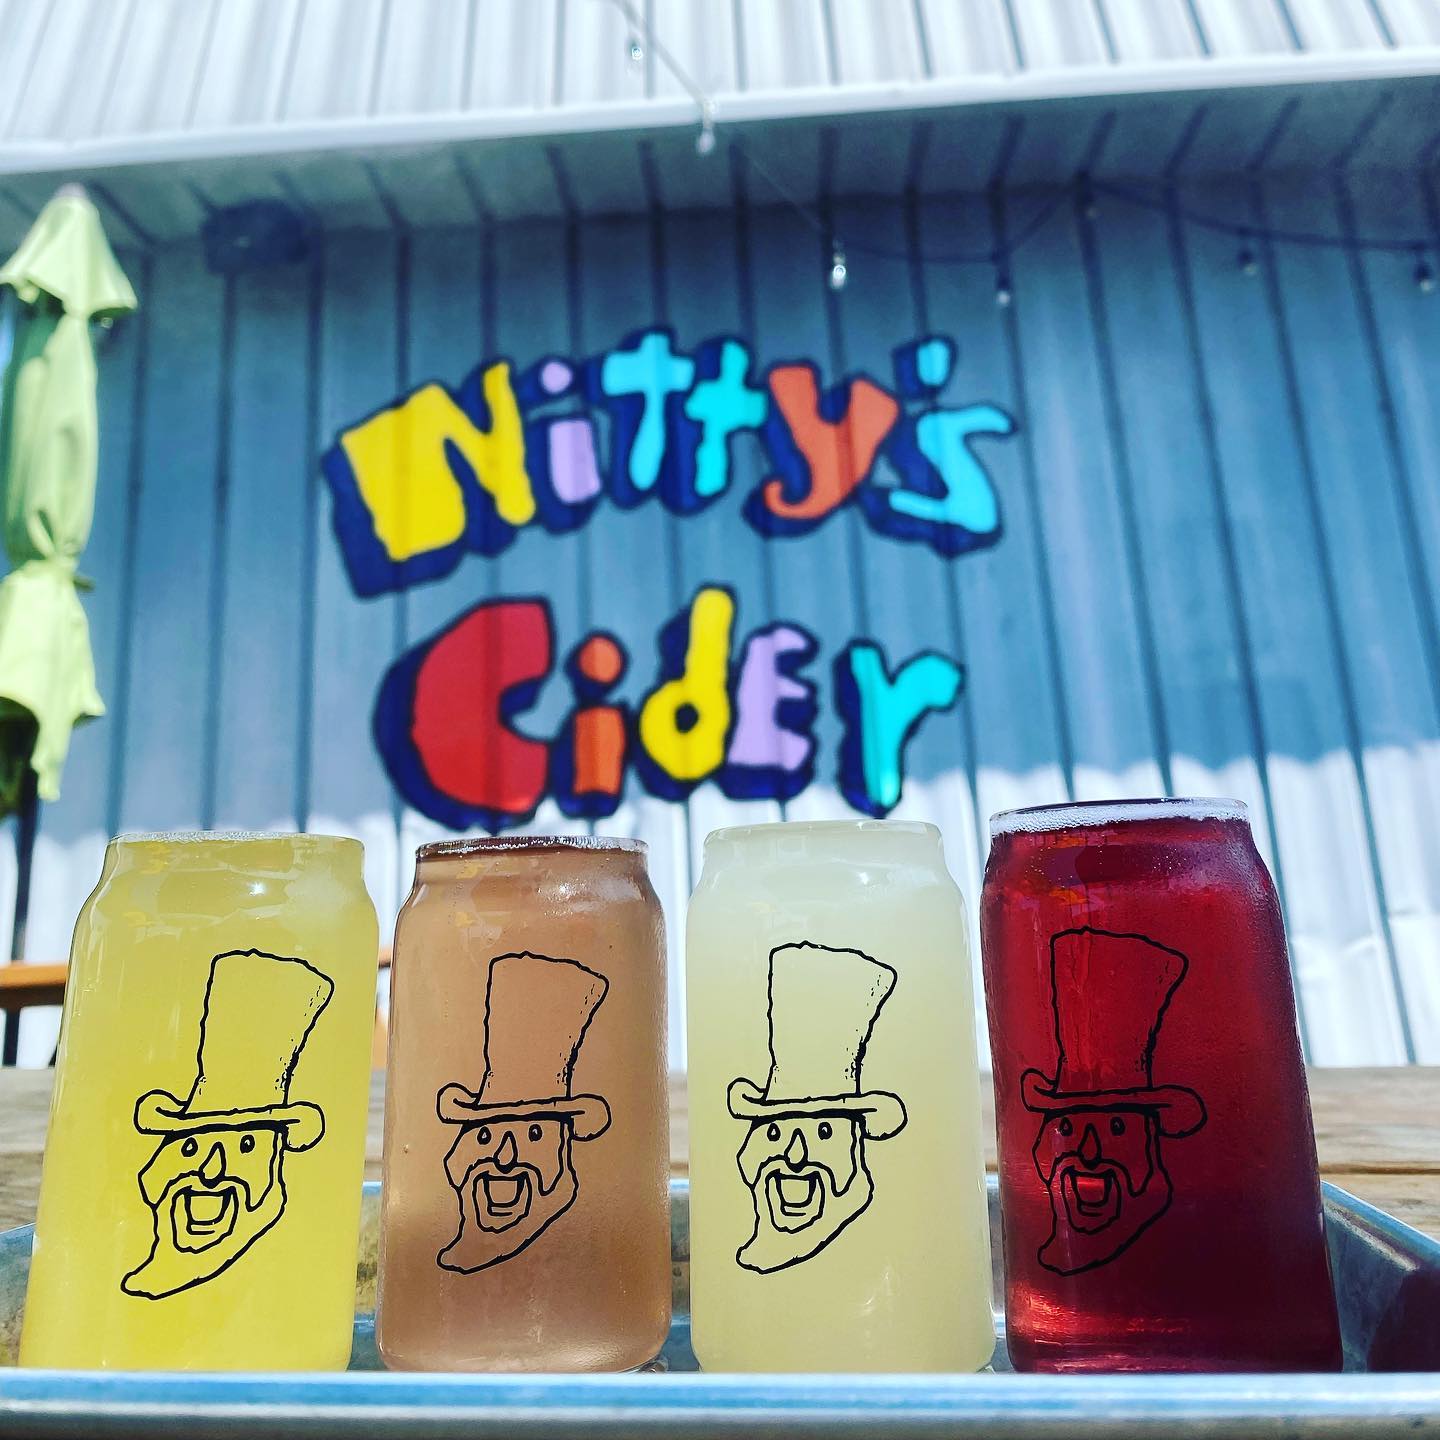 Four glasses of cider in front of the Nitty's Cider sign on a table. Photo by Instagram user @nittyscider.